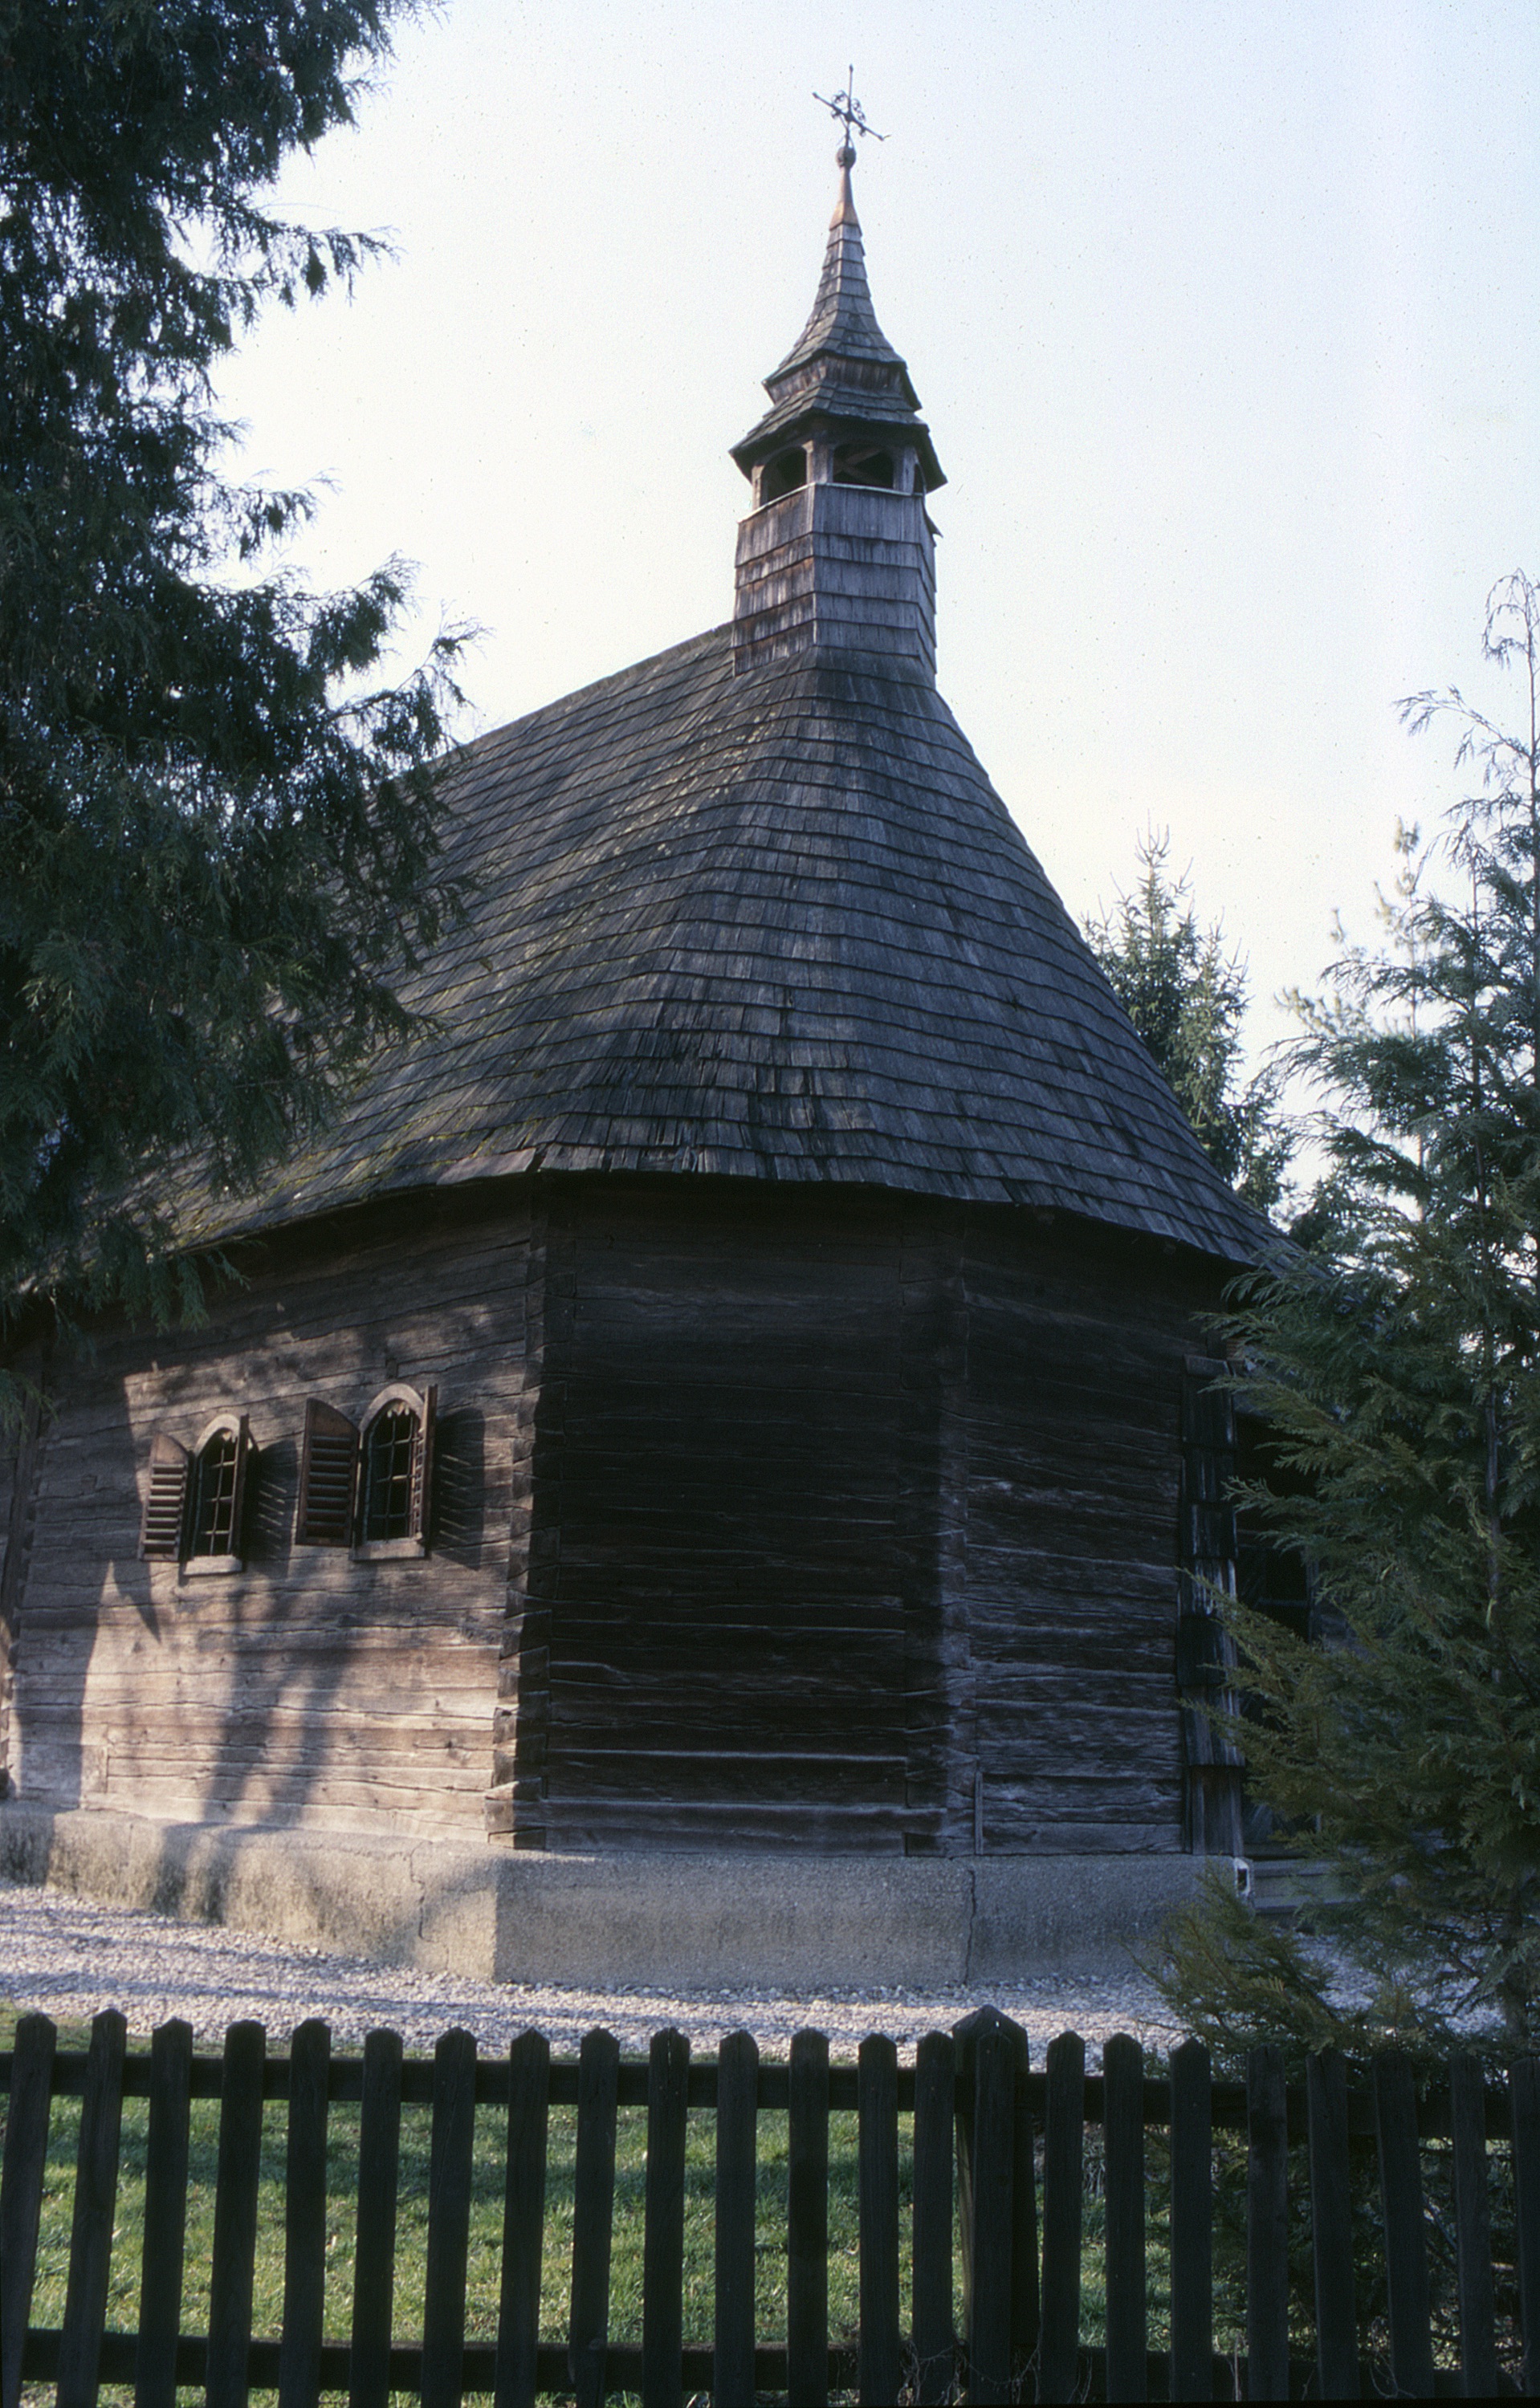 <p>The apse of the chapel shows the 'swallow's tail' (open-dovetail) joints of its horizontal oak plank construction. Elsewhere in the building local or 'German angle' joinery prevails.</p>